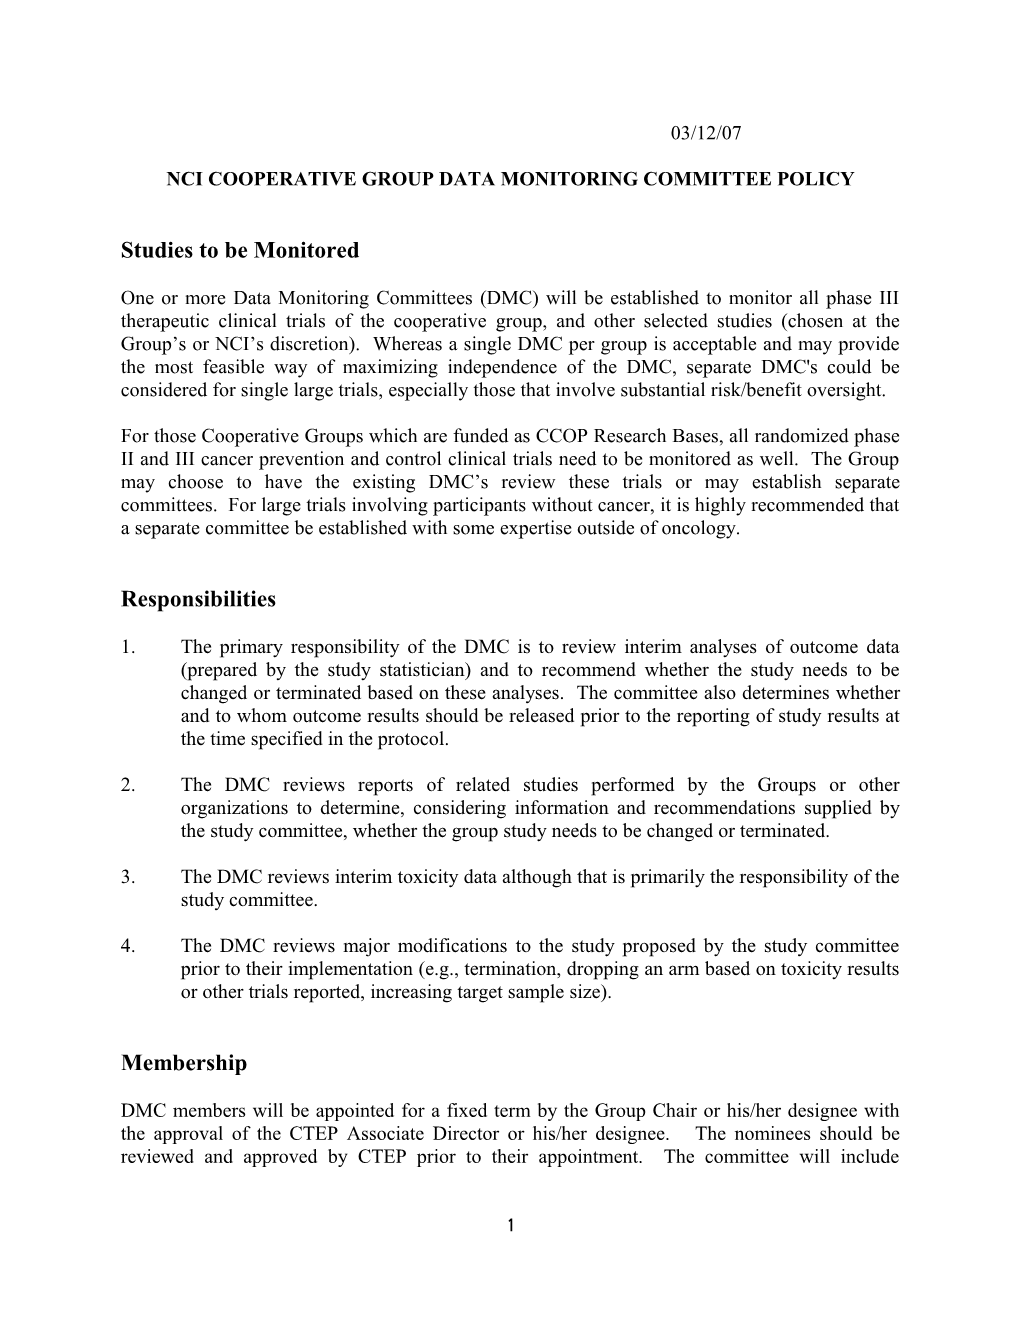 Nci Cooperative Group Data Monitoring Committee Policy